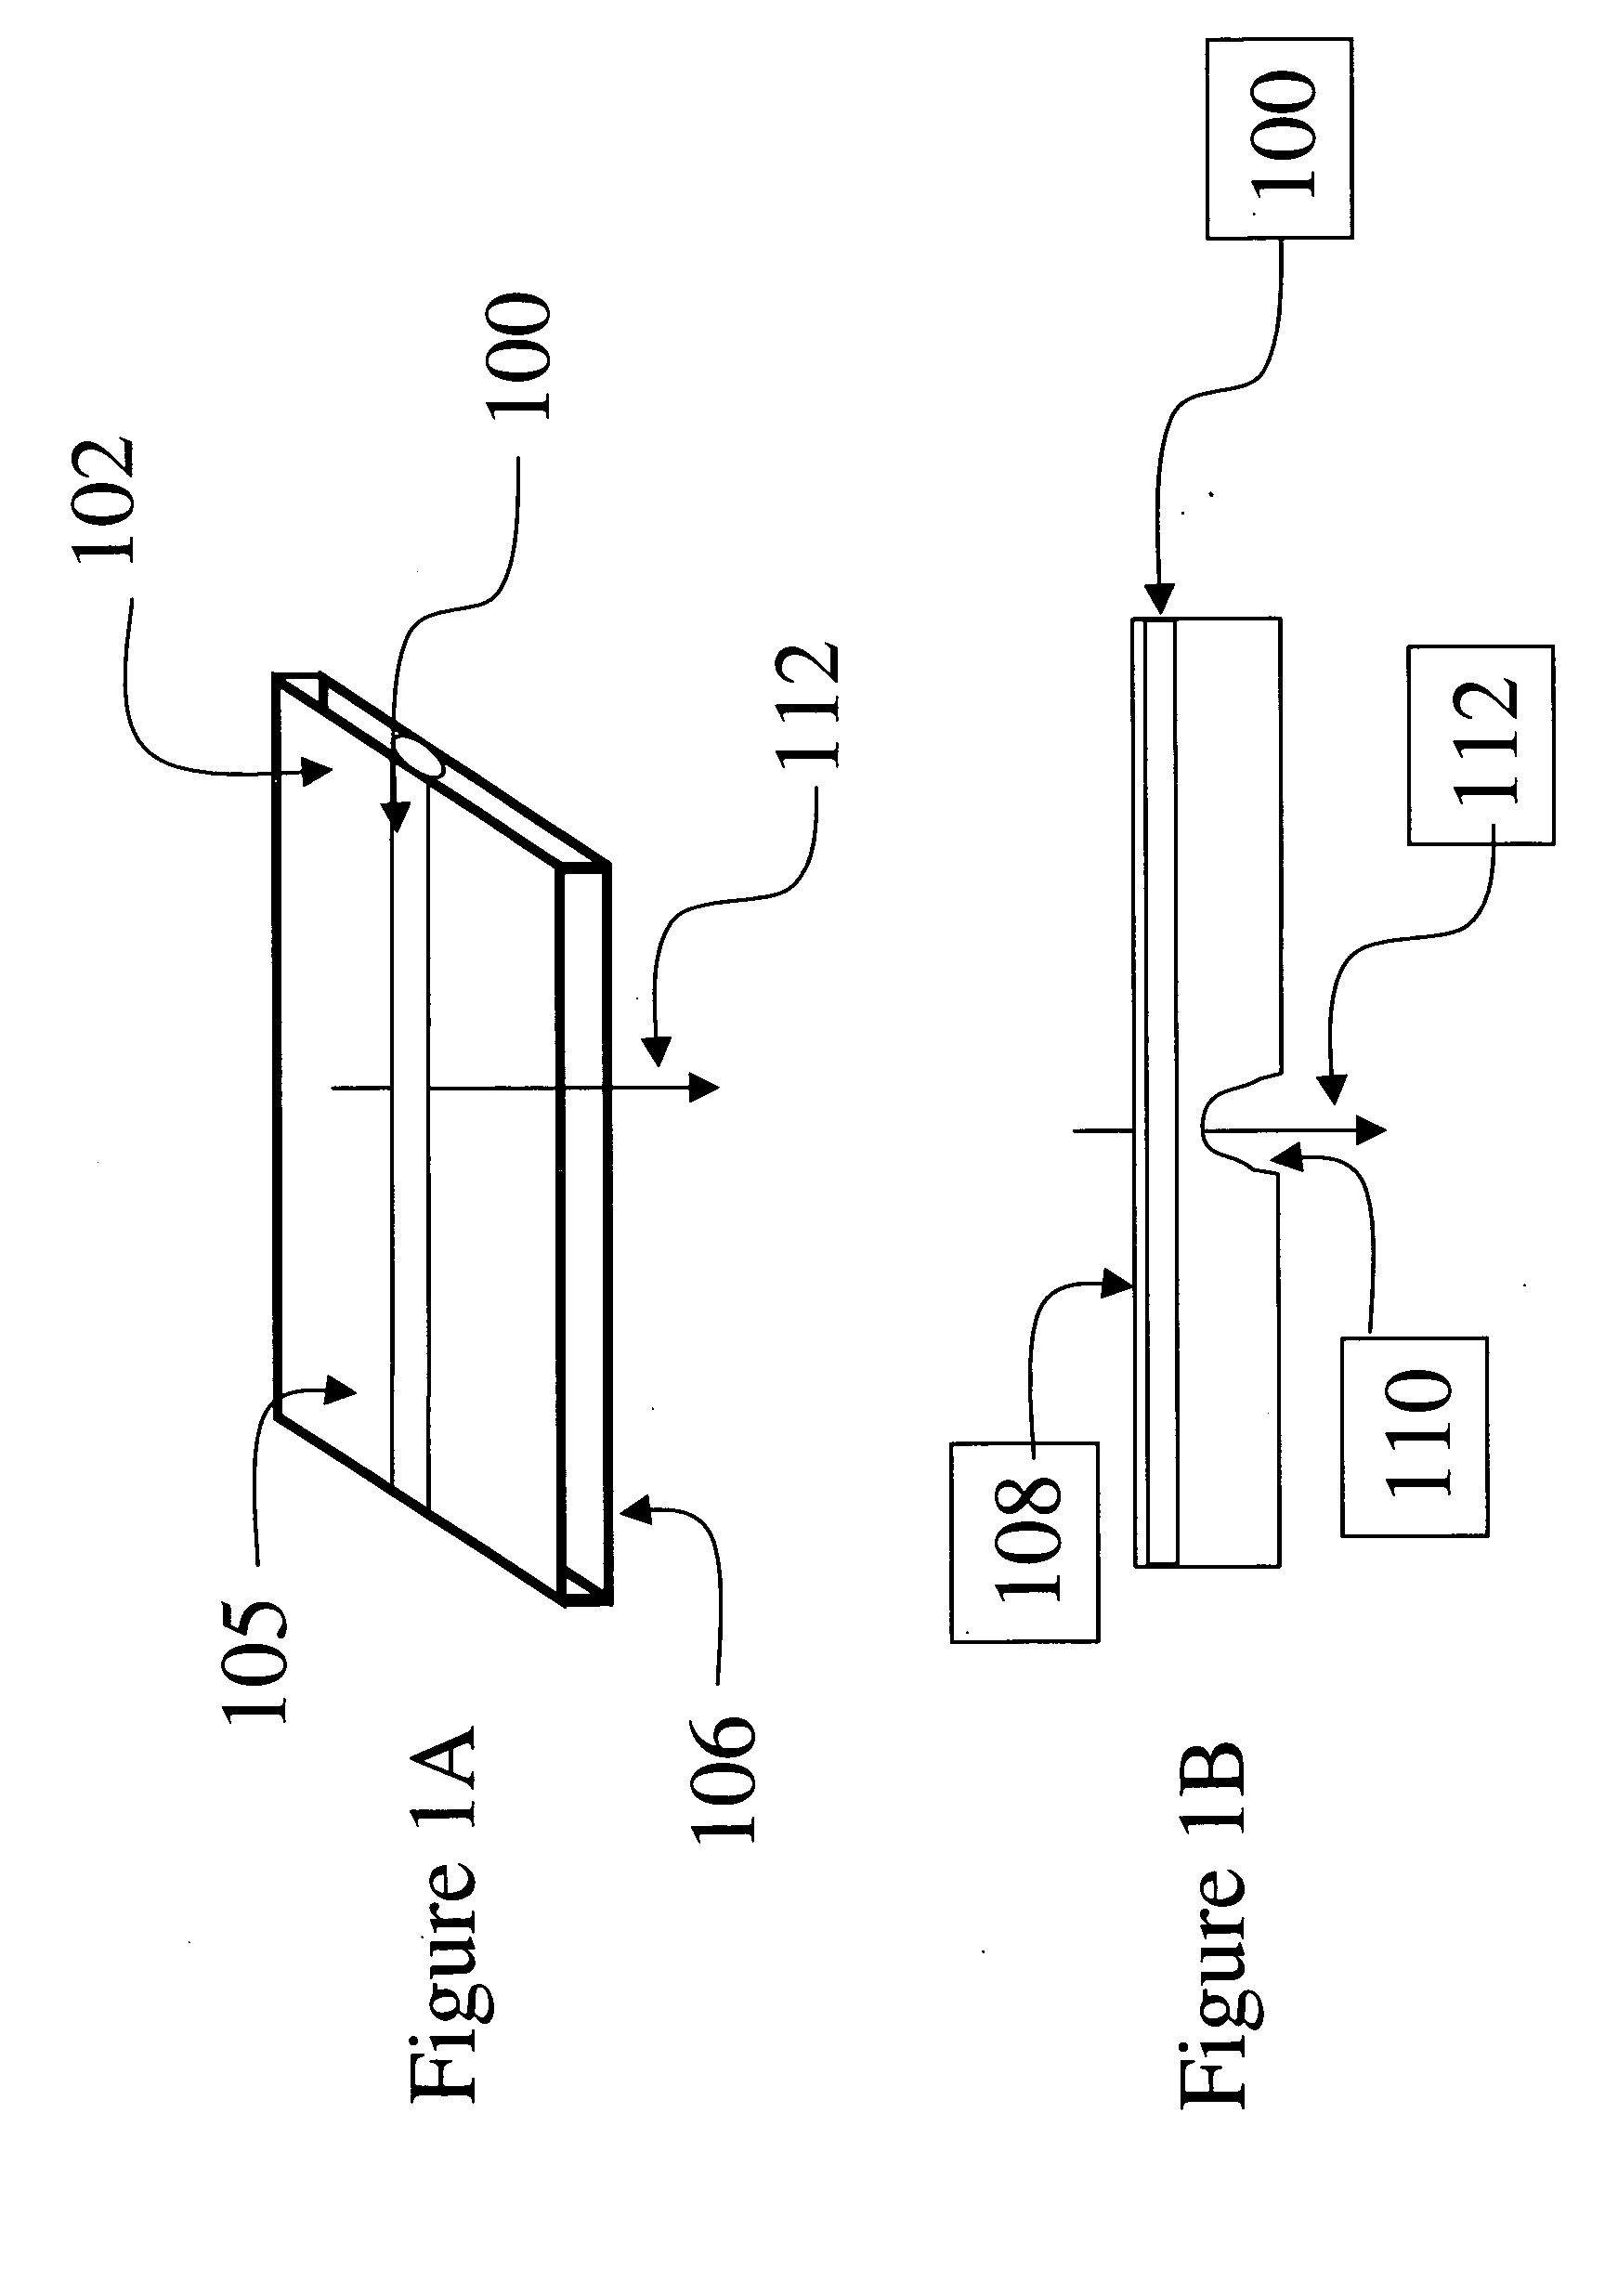 Microfluidic device with diffusion between adjacent lumens